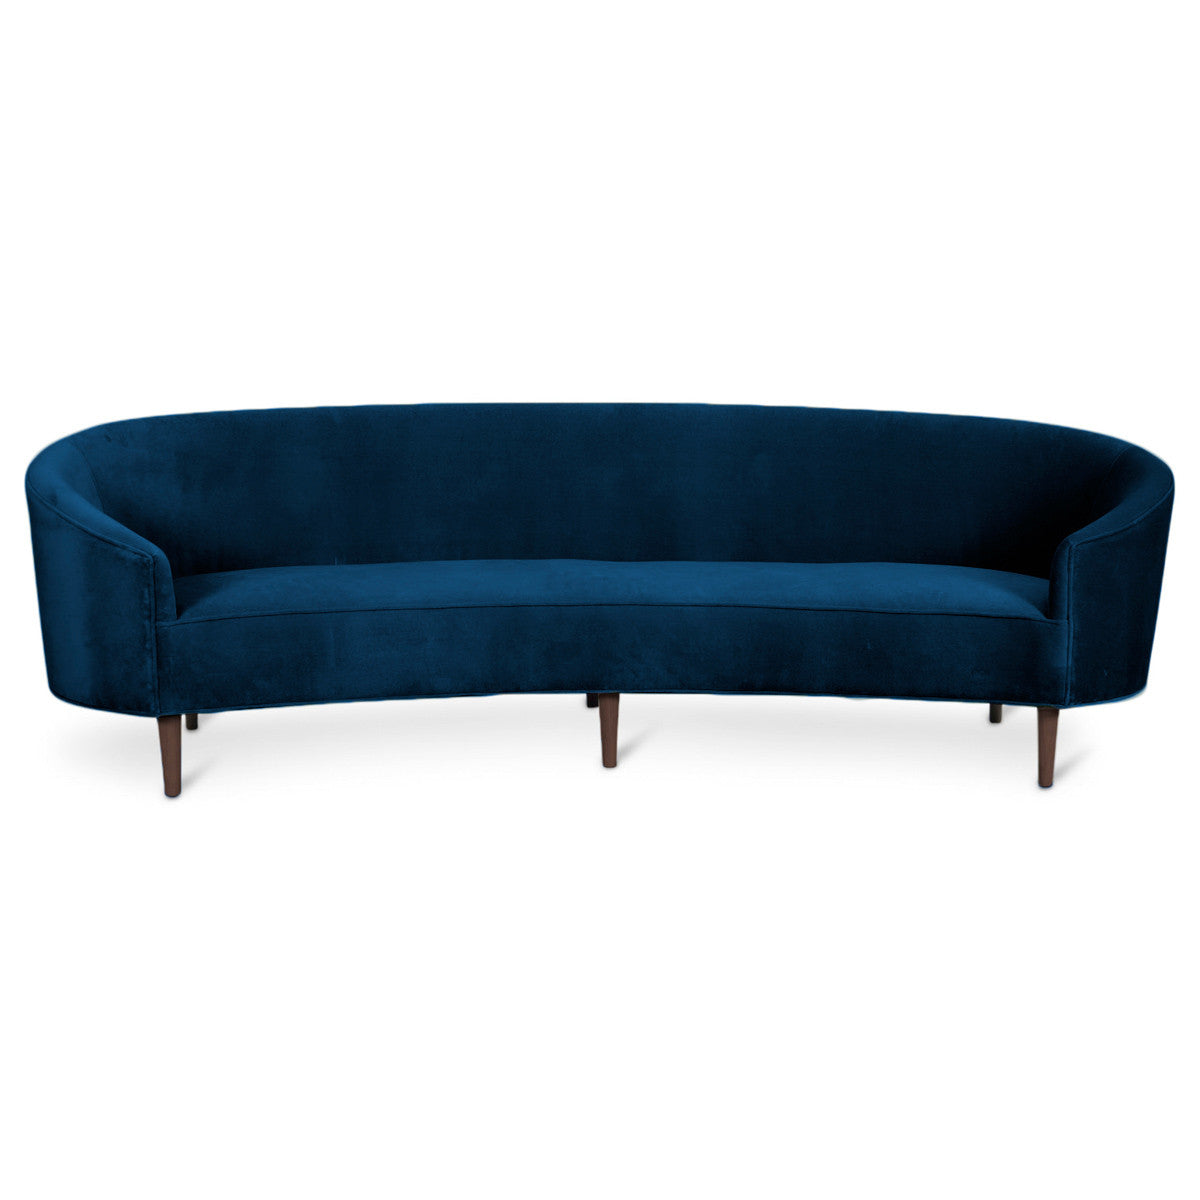 Art Deco Style Crescent Sofa With Curved Arms Modshop